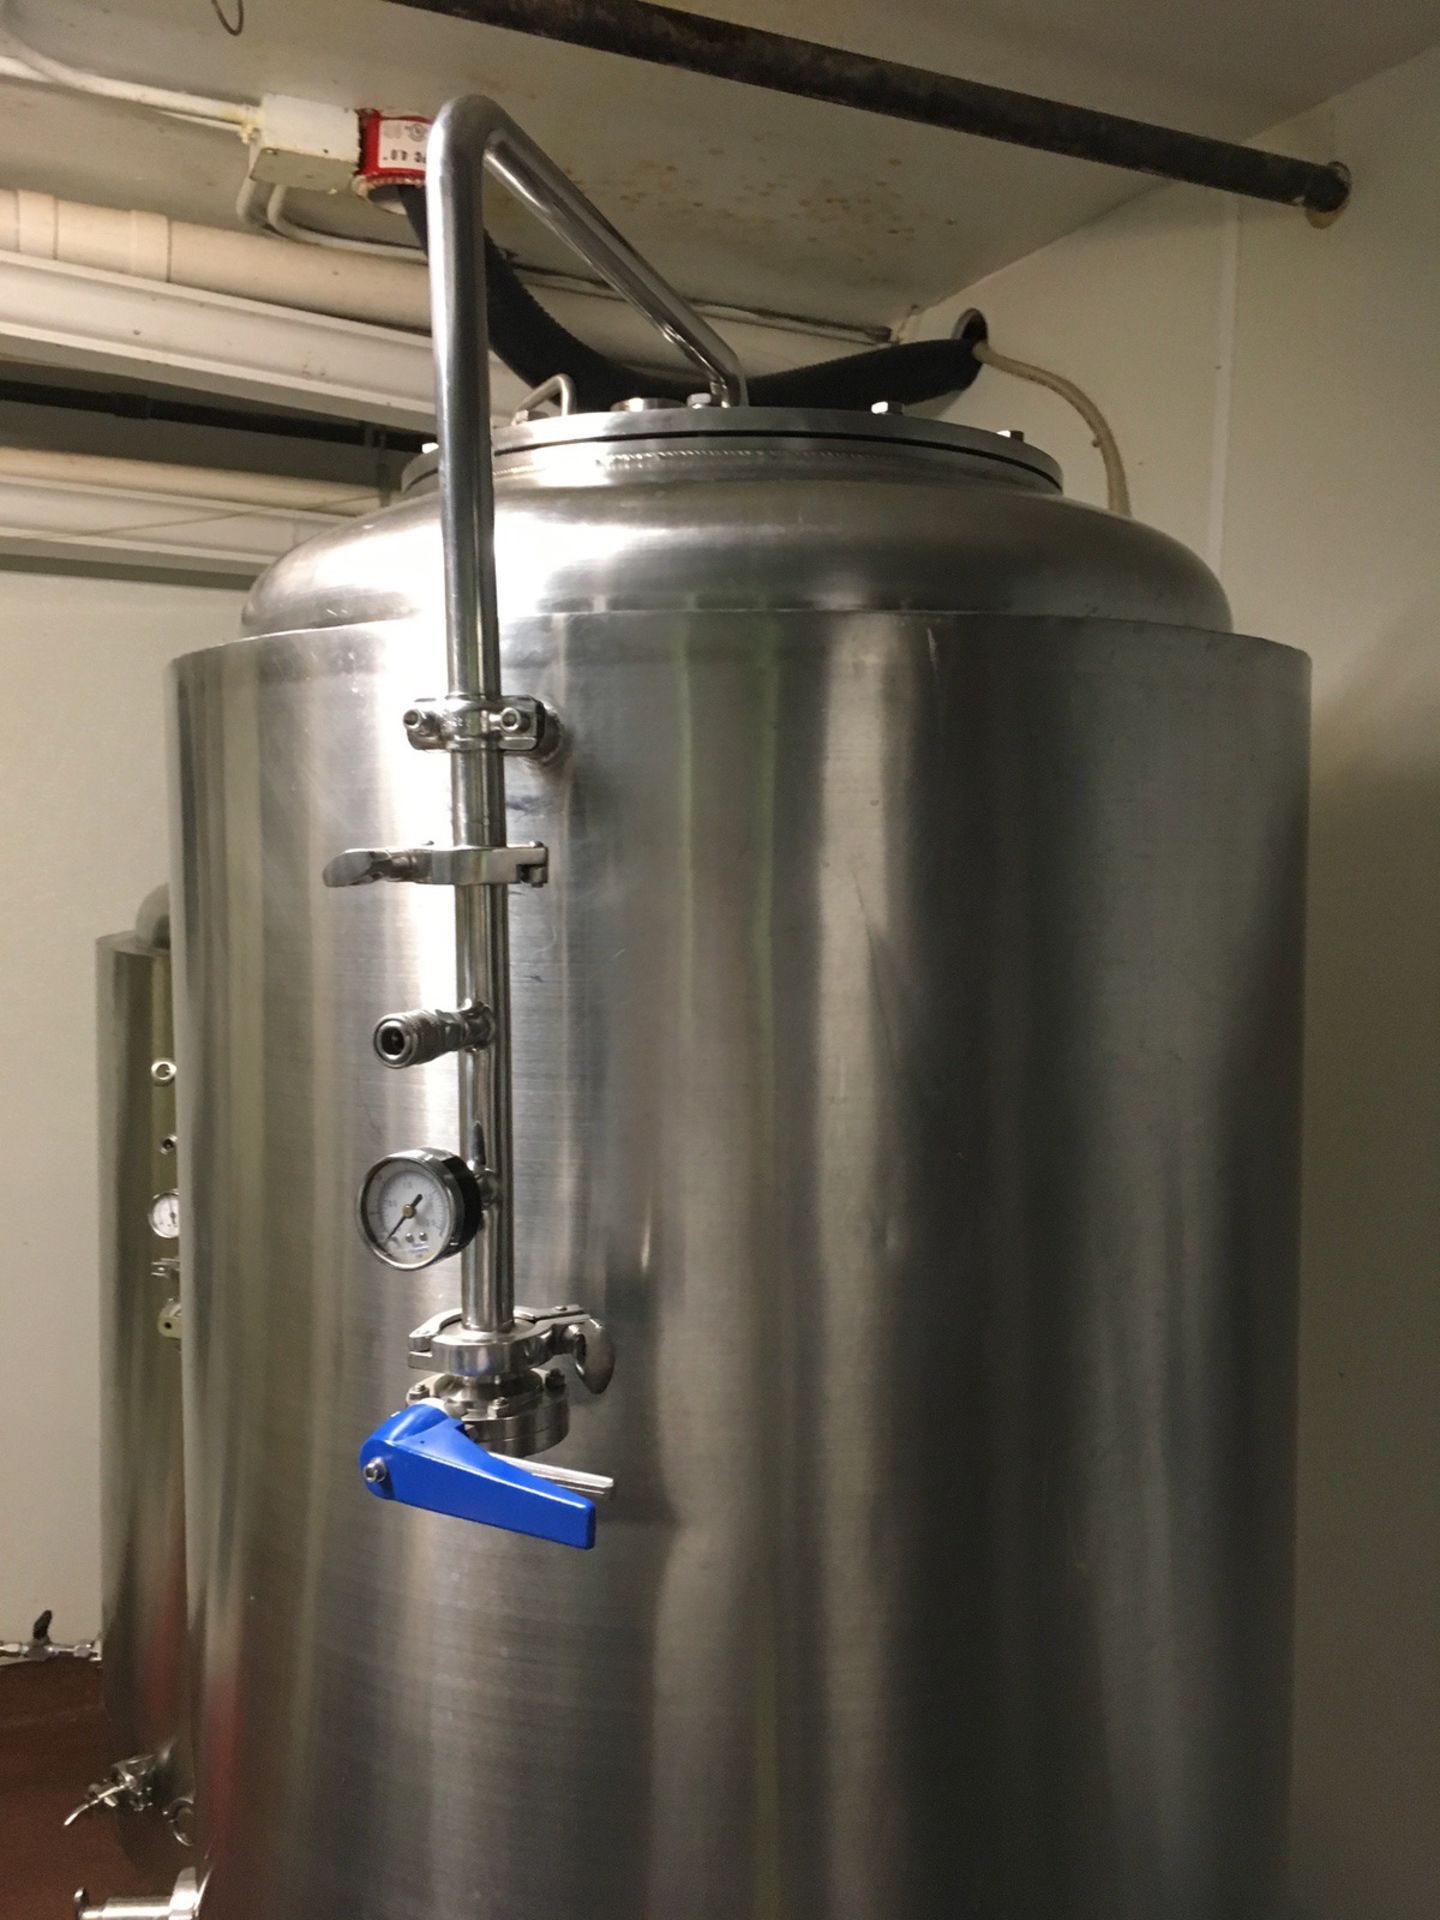 2007 3.5 BBL Stainless Steel Jacketed Fermenter | Subject to Bulk | Rig Fee: $175 - Image 8 of 10